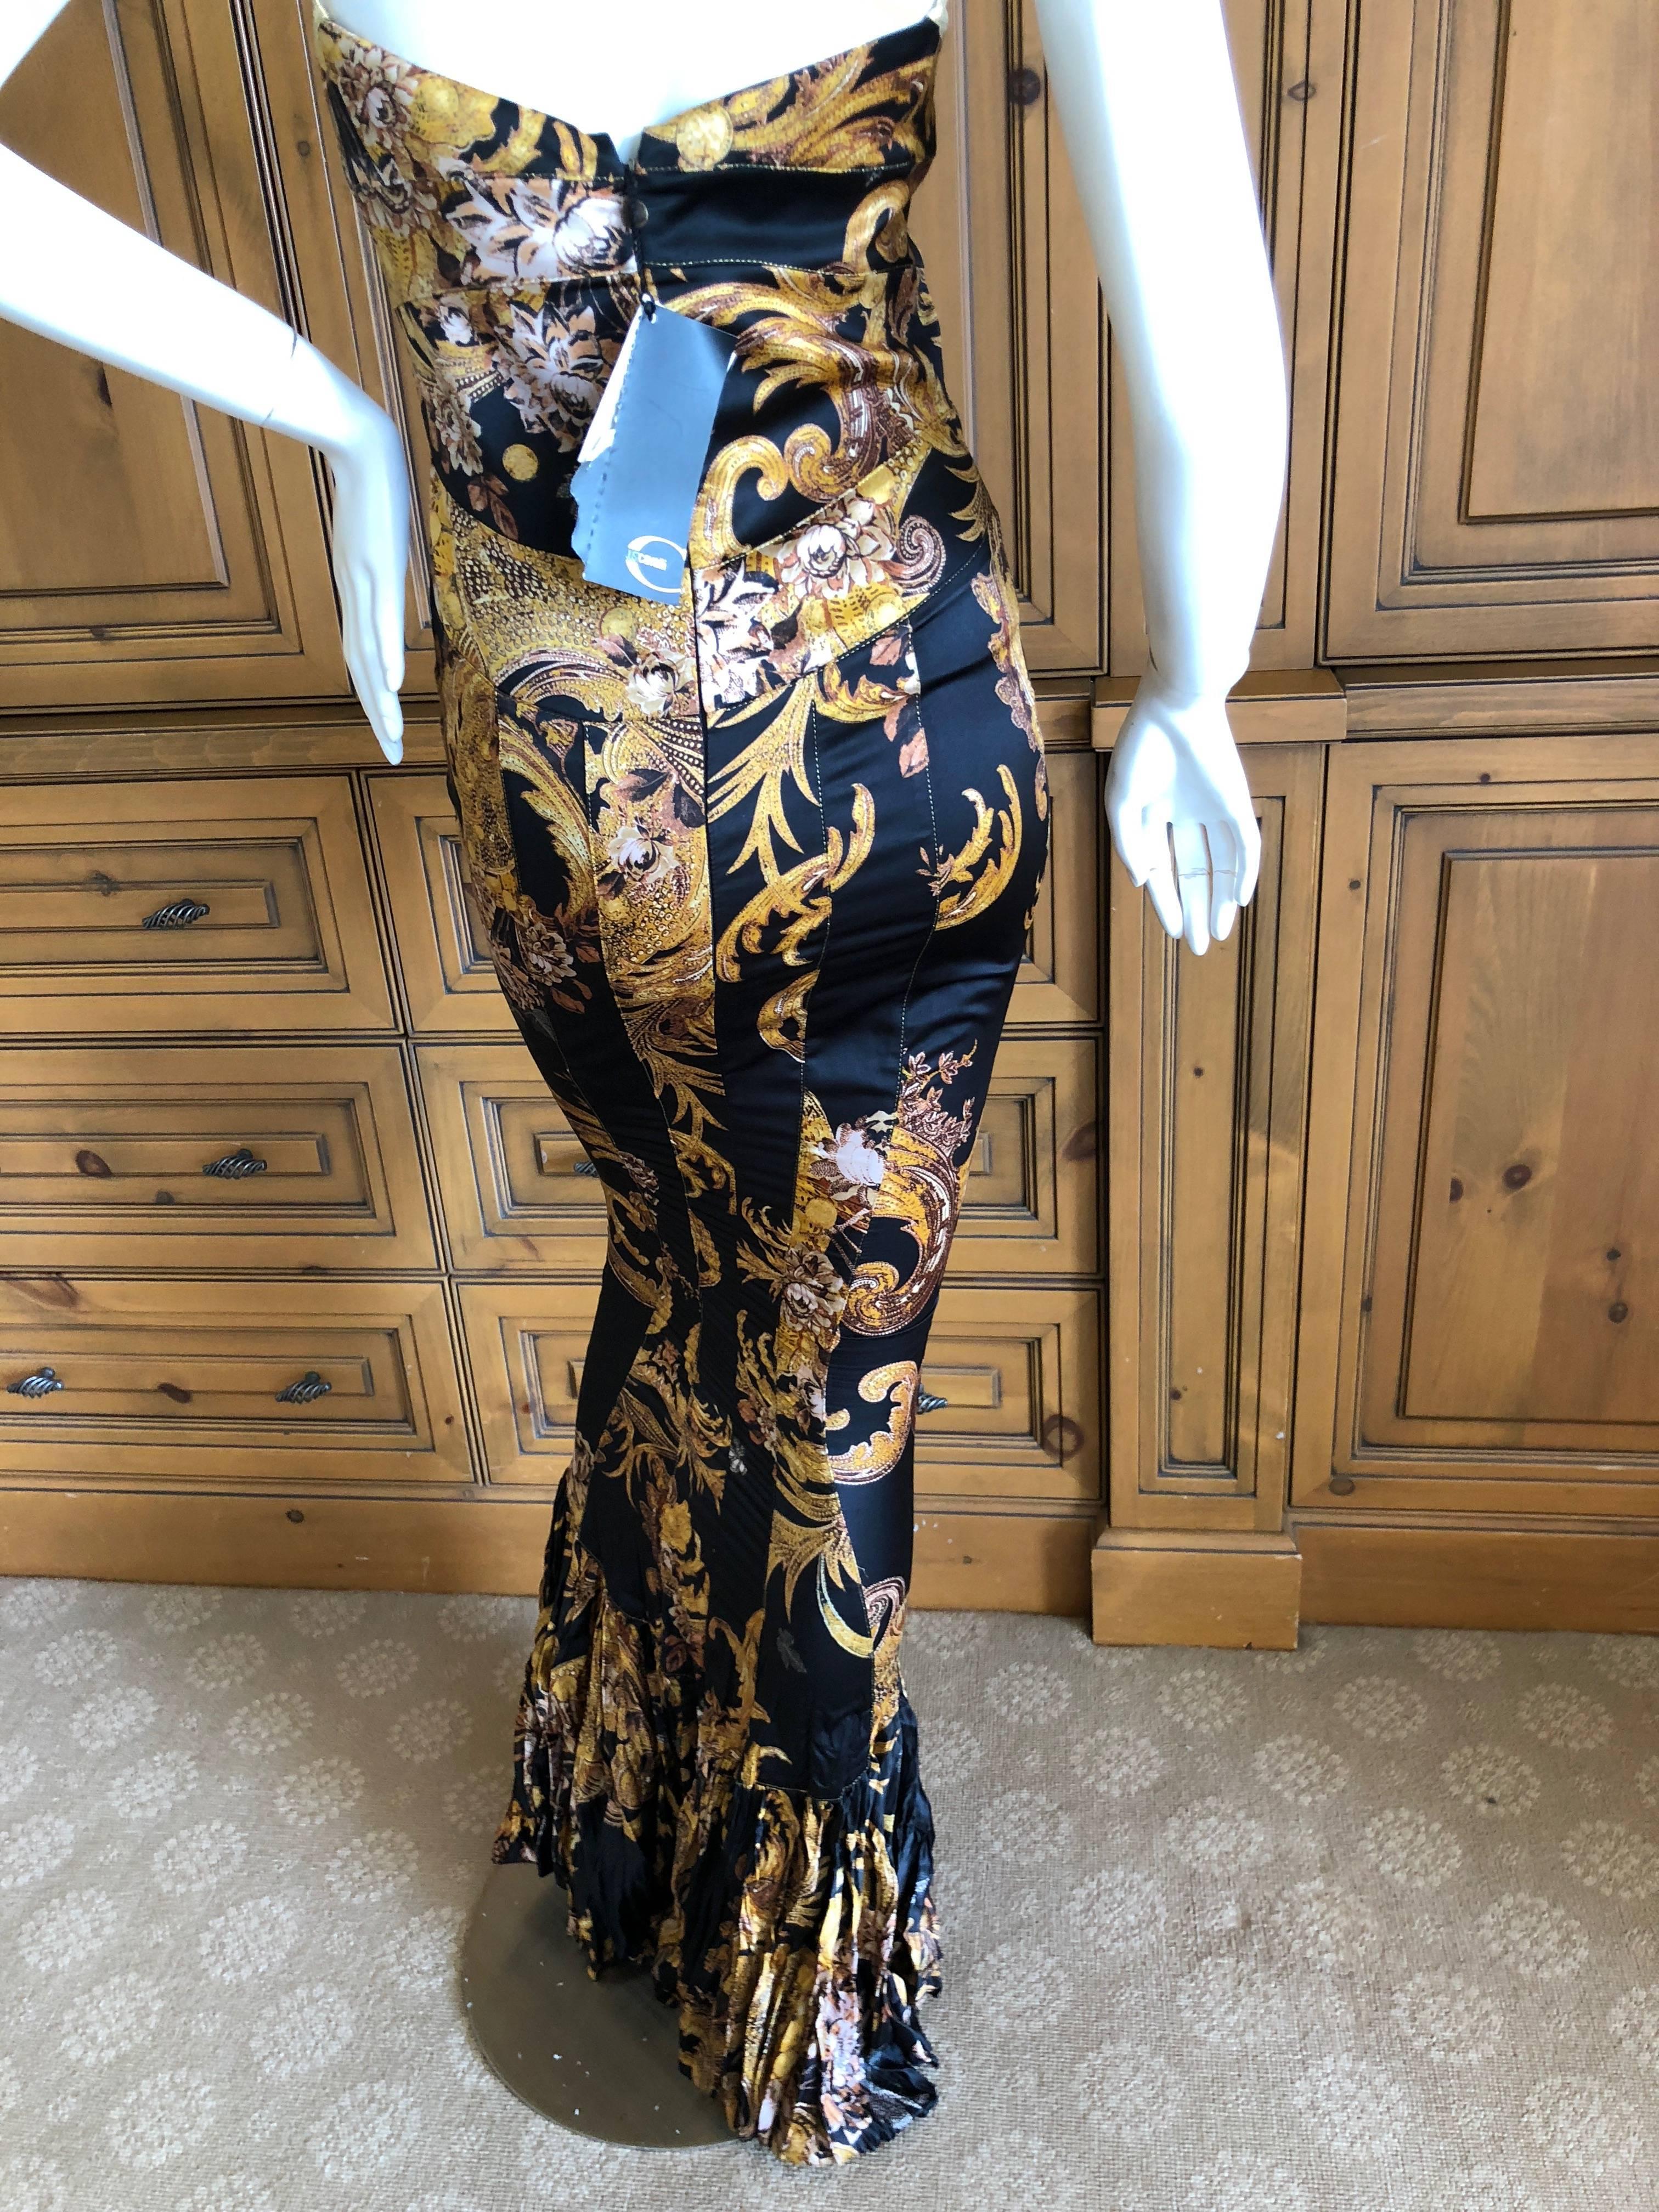 Roberto Cavalli Elegant Fishtail Mermaid Back Evening Dress.
This is so pretty, with a rich gold print, and mermaid fishtail back.
Size 40, but runs small.
Bust 34